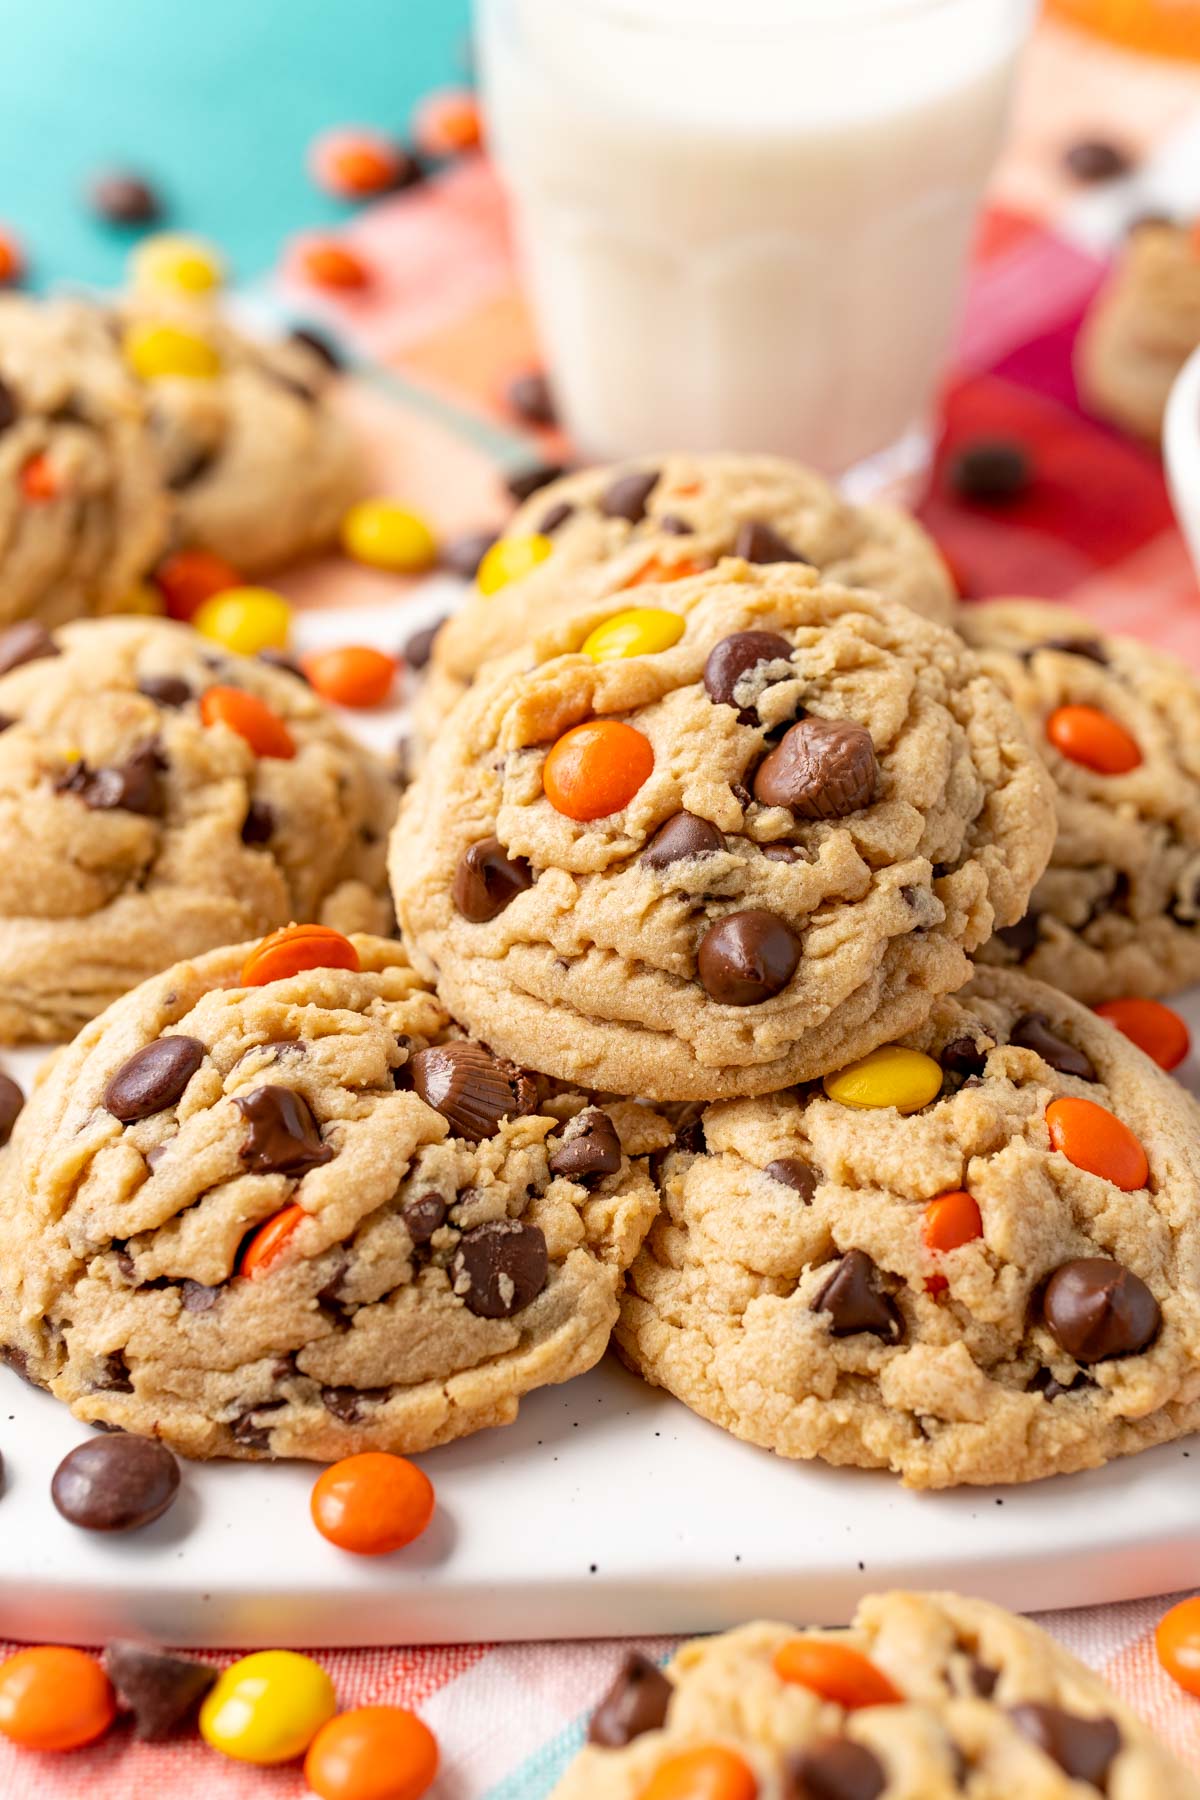 Close up of a peanut butter reese's pieces chocolate chip cookie on more cookies.